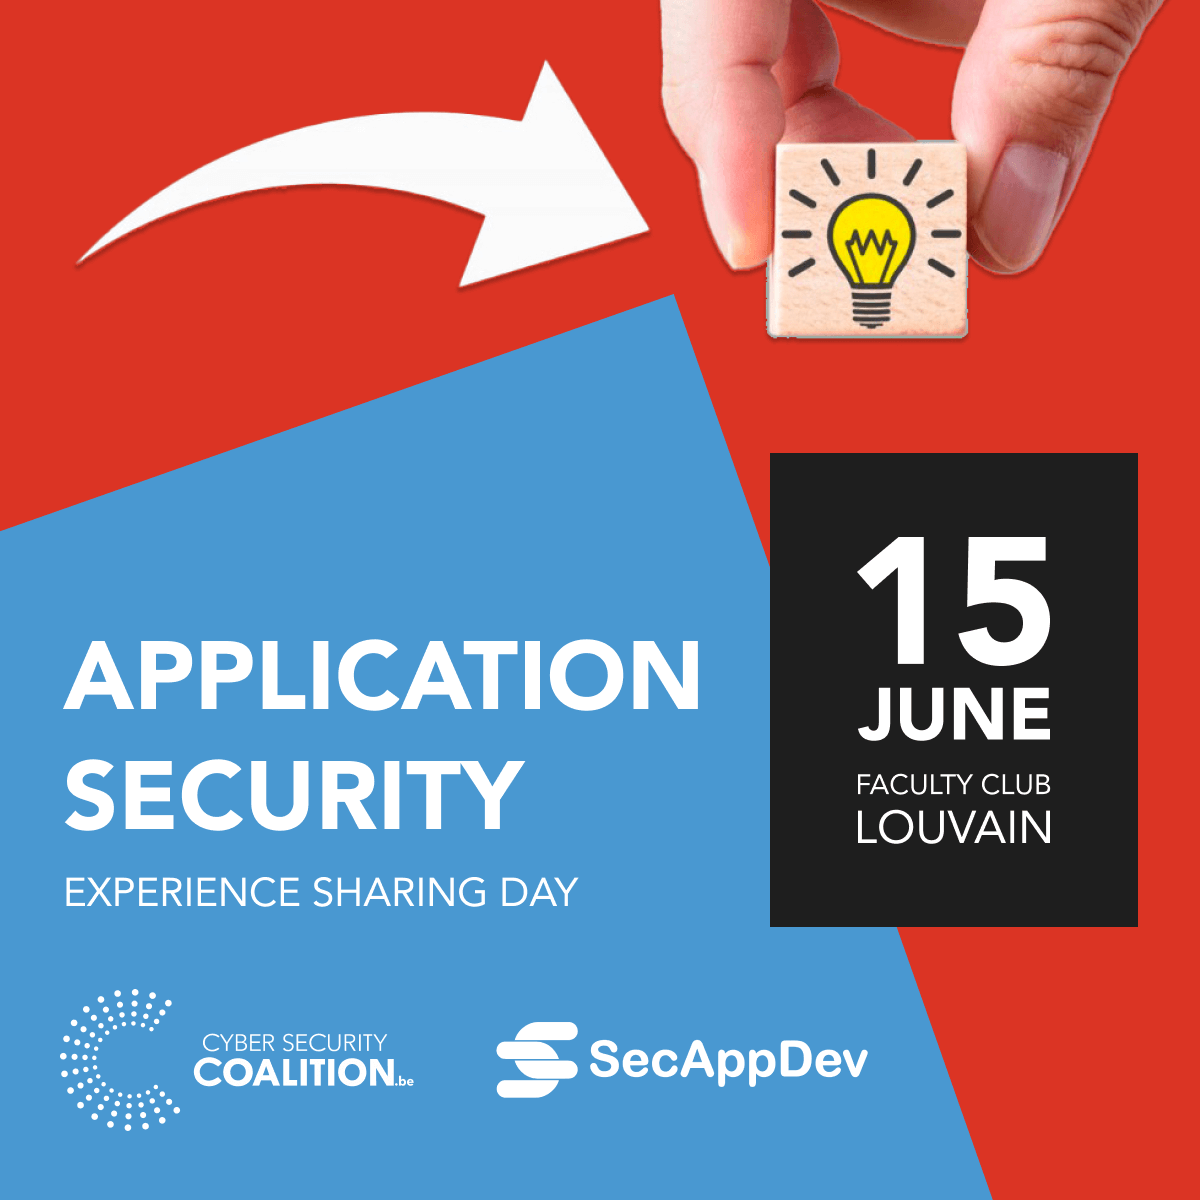 Application Security Experience Sharing Day